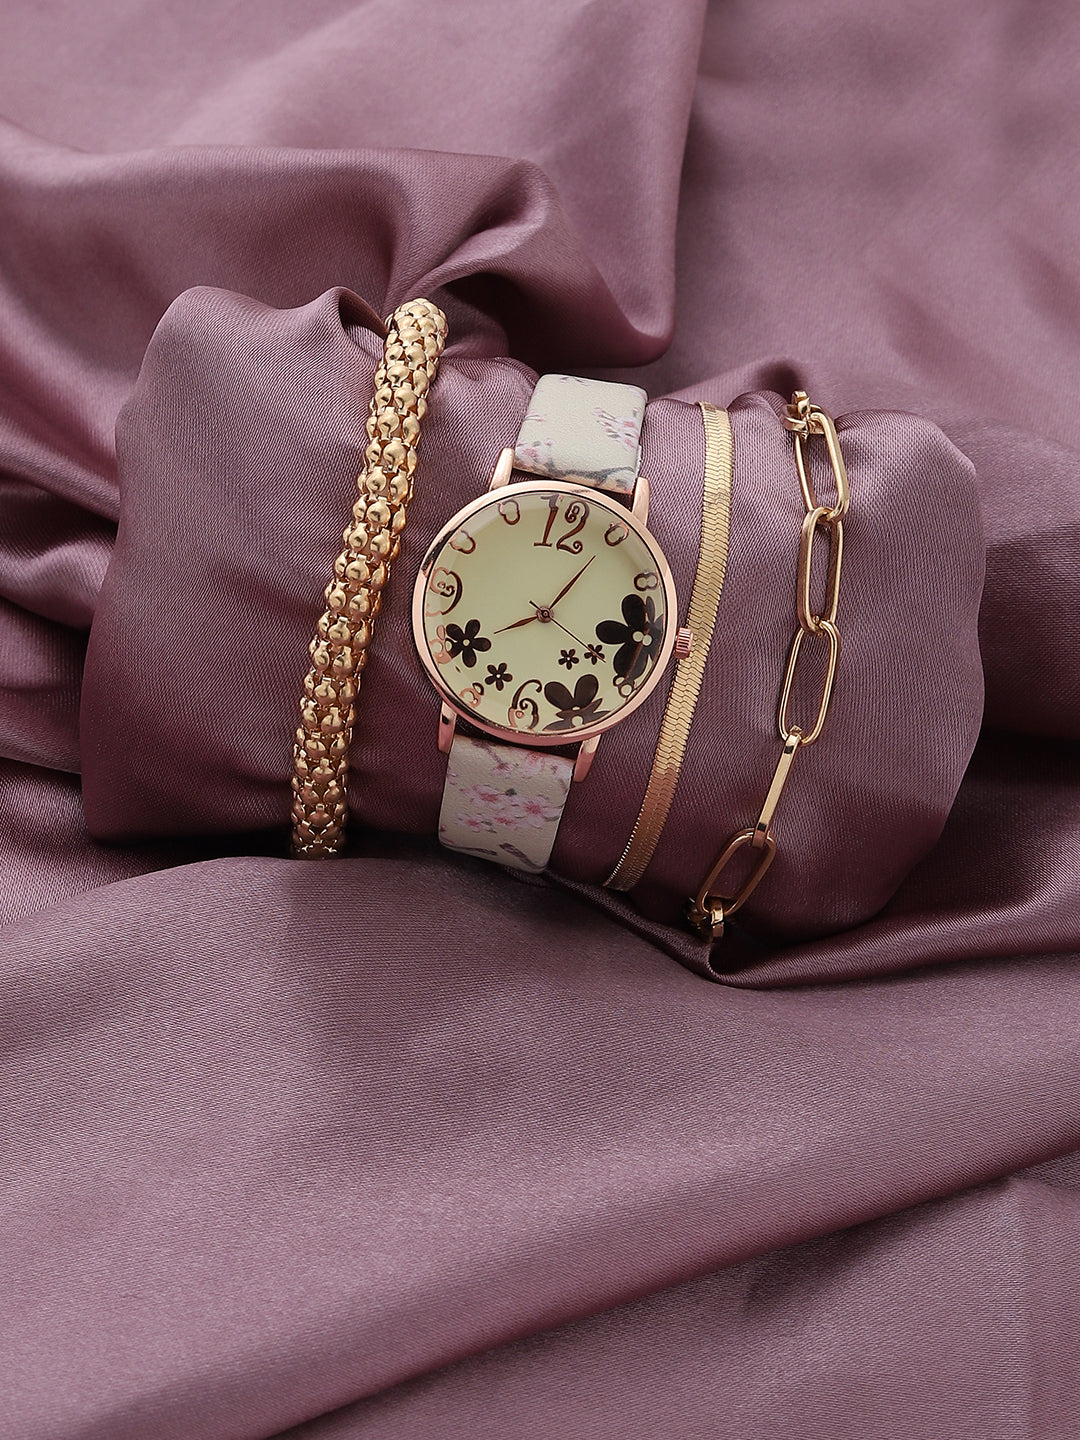 Beige Decorative Analog Round Dial With Floral Printed Leather Strap Watch & Bracelets